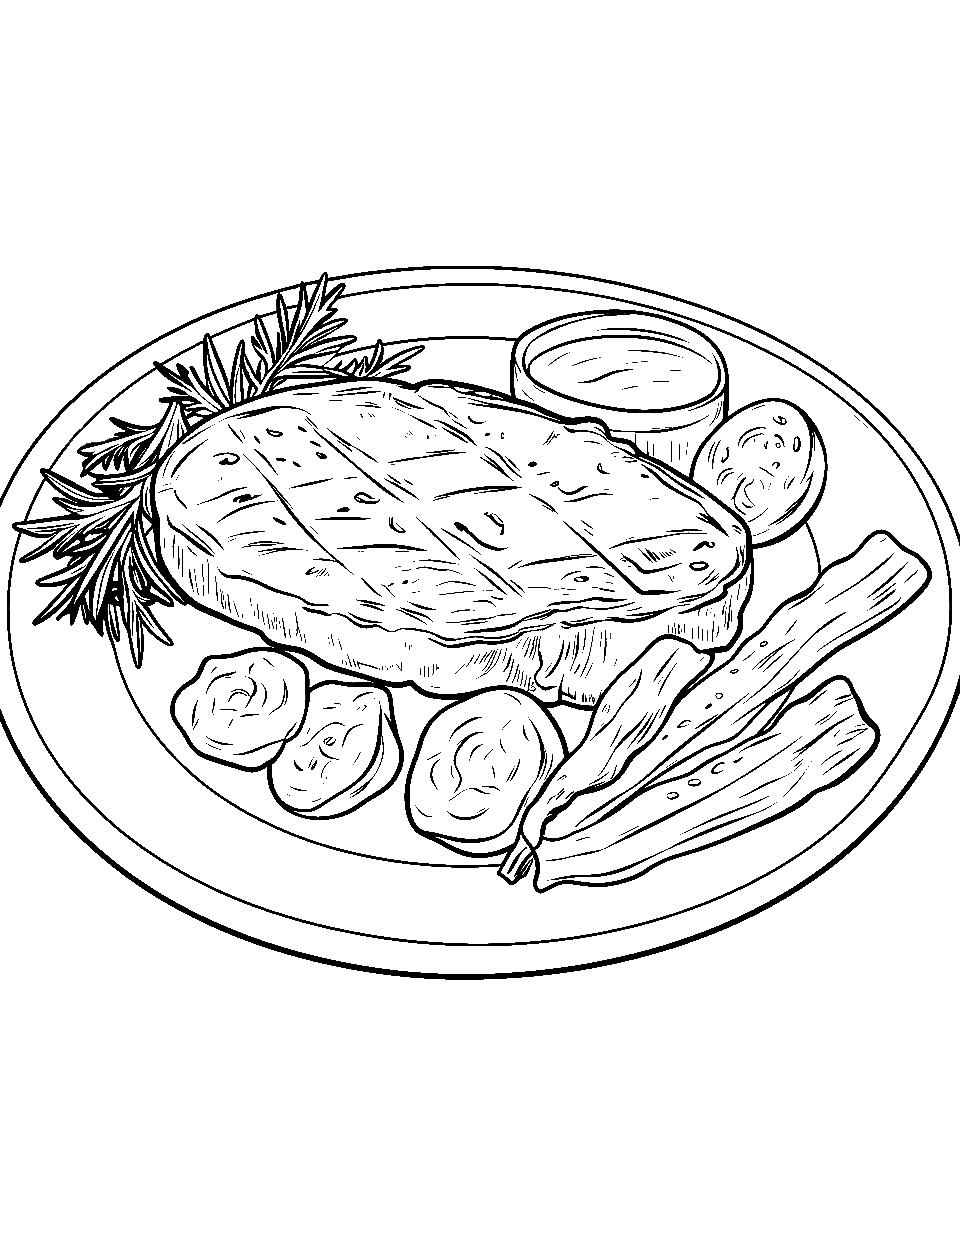 Steak Dinner Food Coloring Page - A steak with mashed potatoes and grilled veggies.